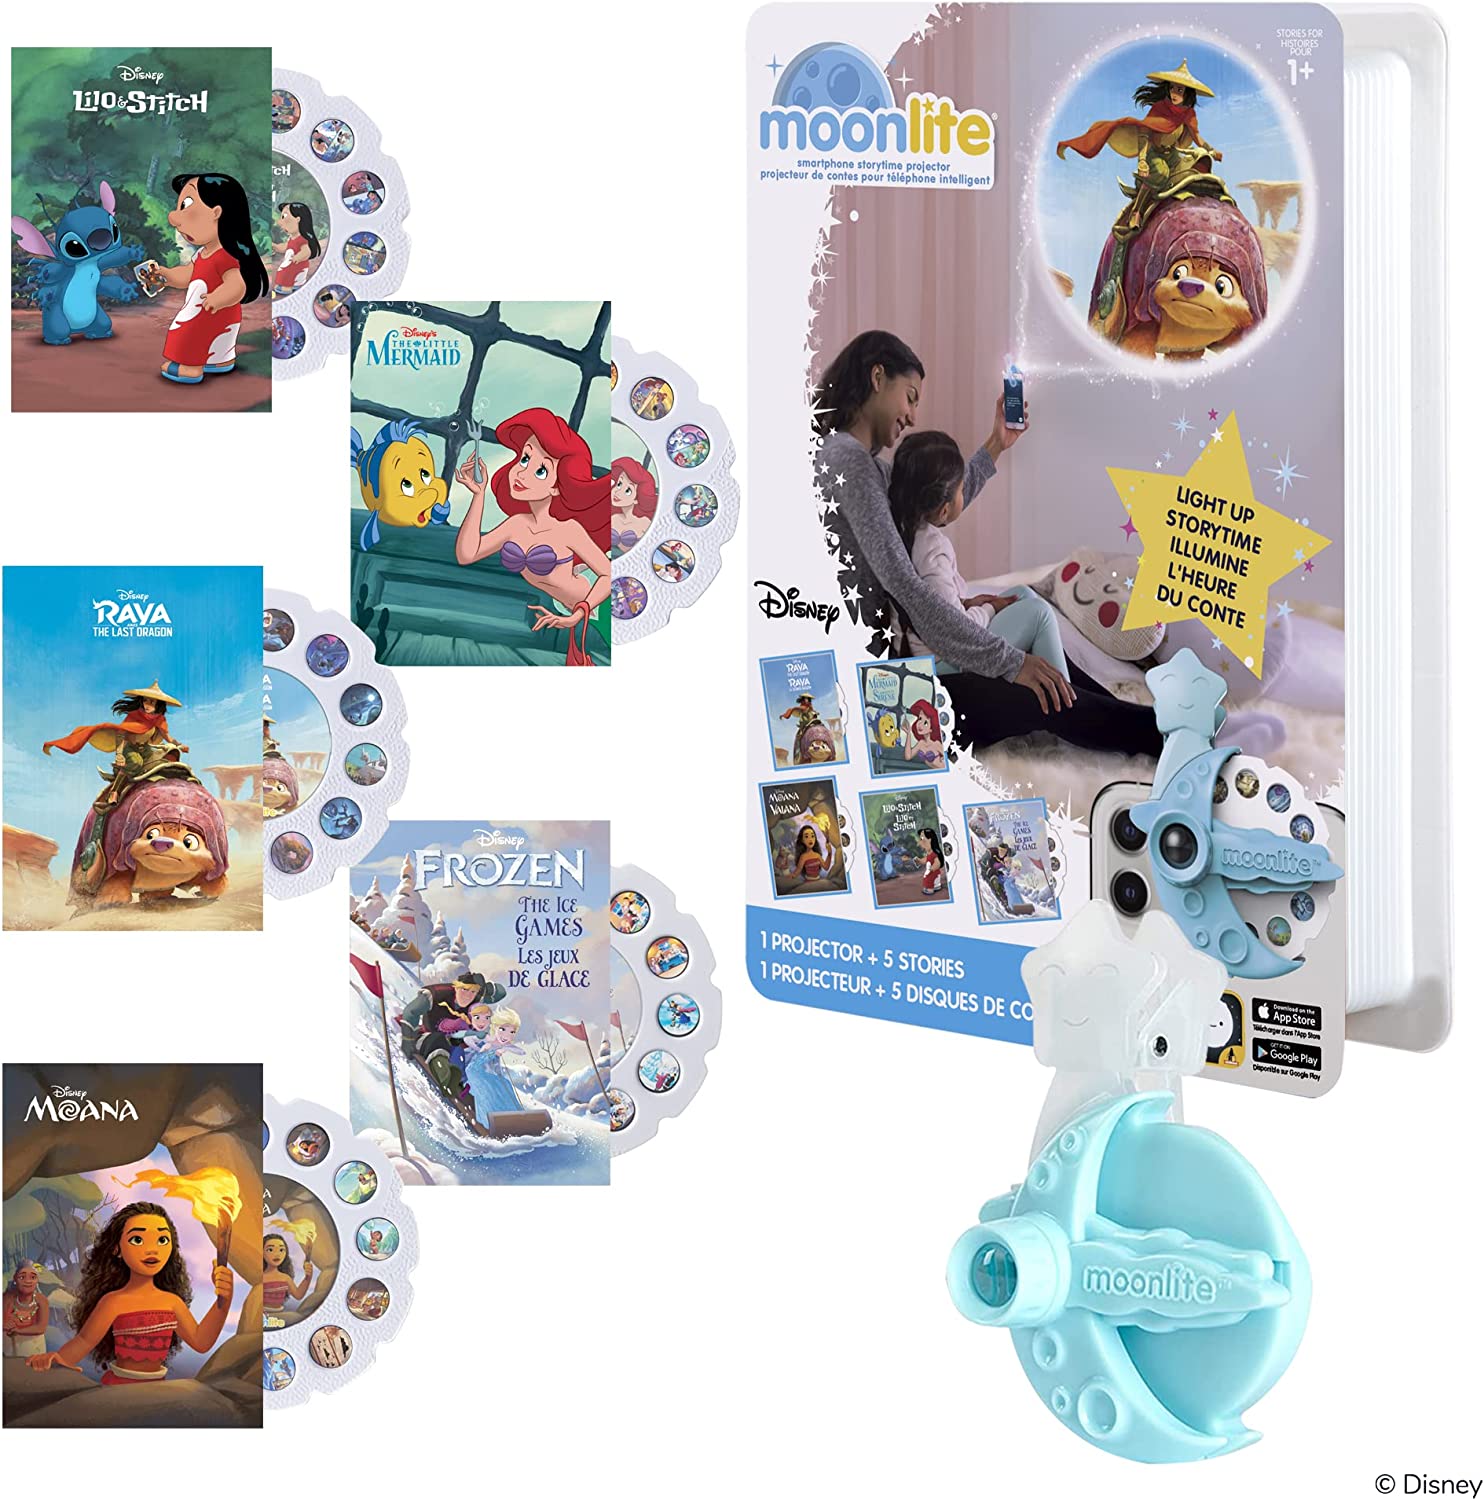 Disney Modern Classic Moonlight - Toy Box Michigan toys online & in store